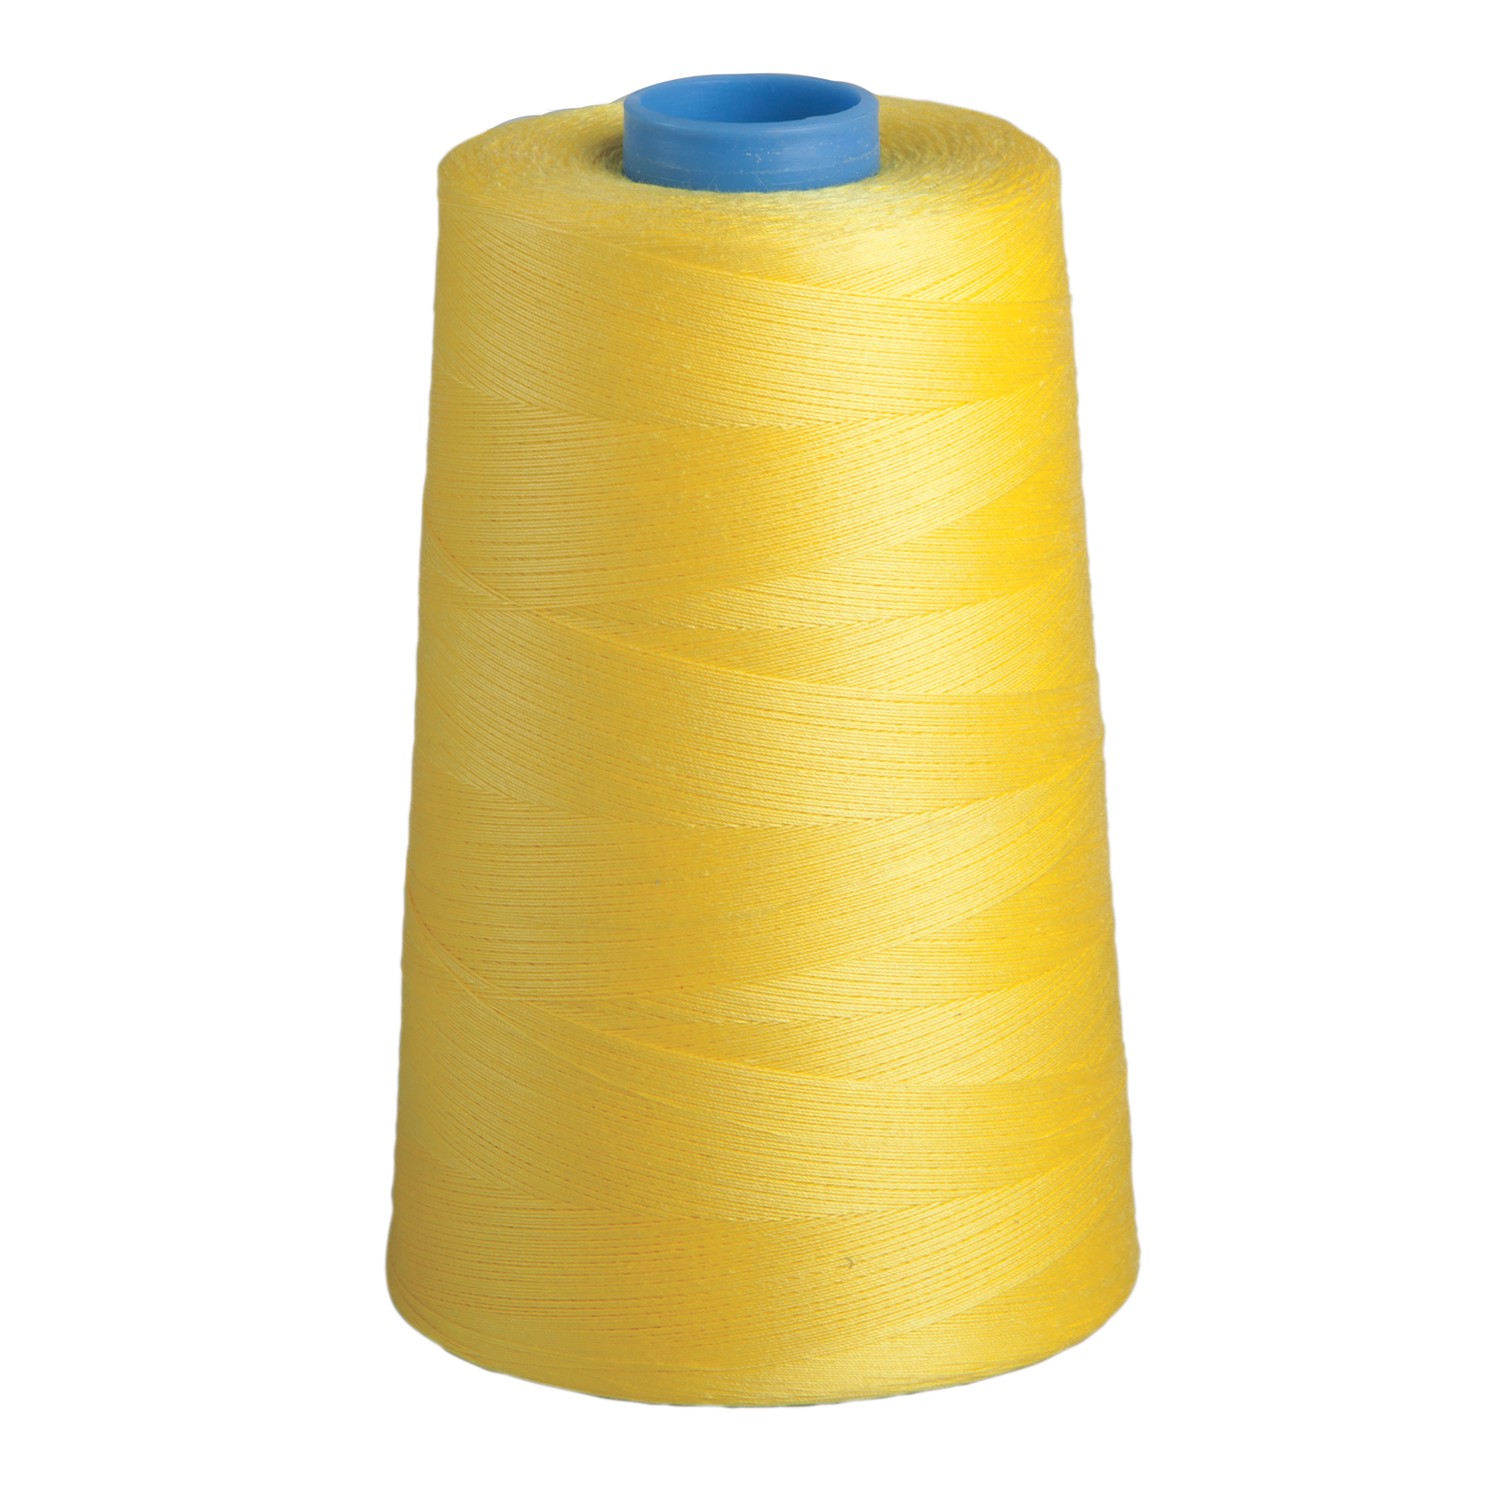 Connecting Threads 100% Cotton Thread Sets -1200 Yard Spools (Neutral)